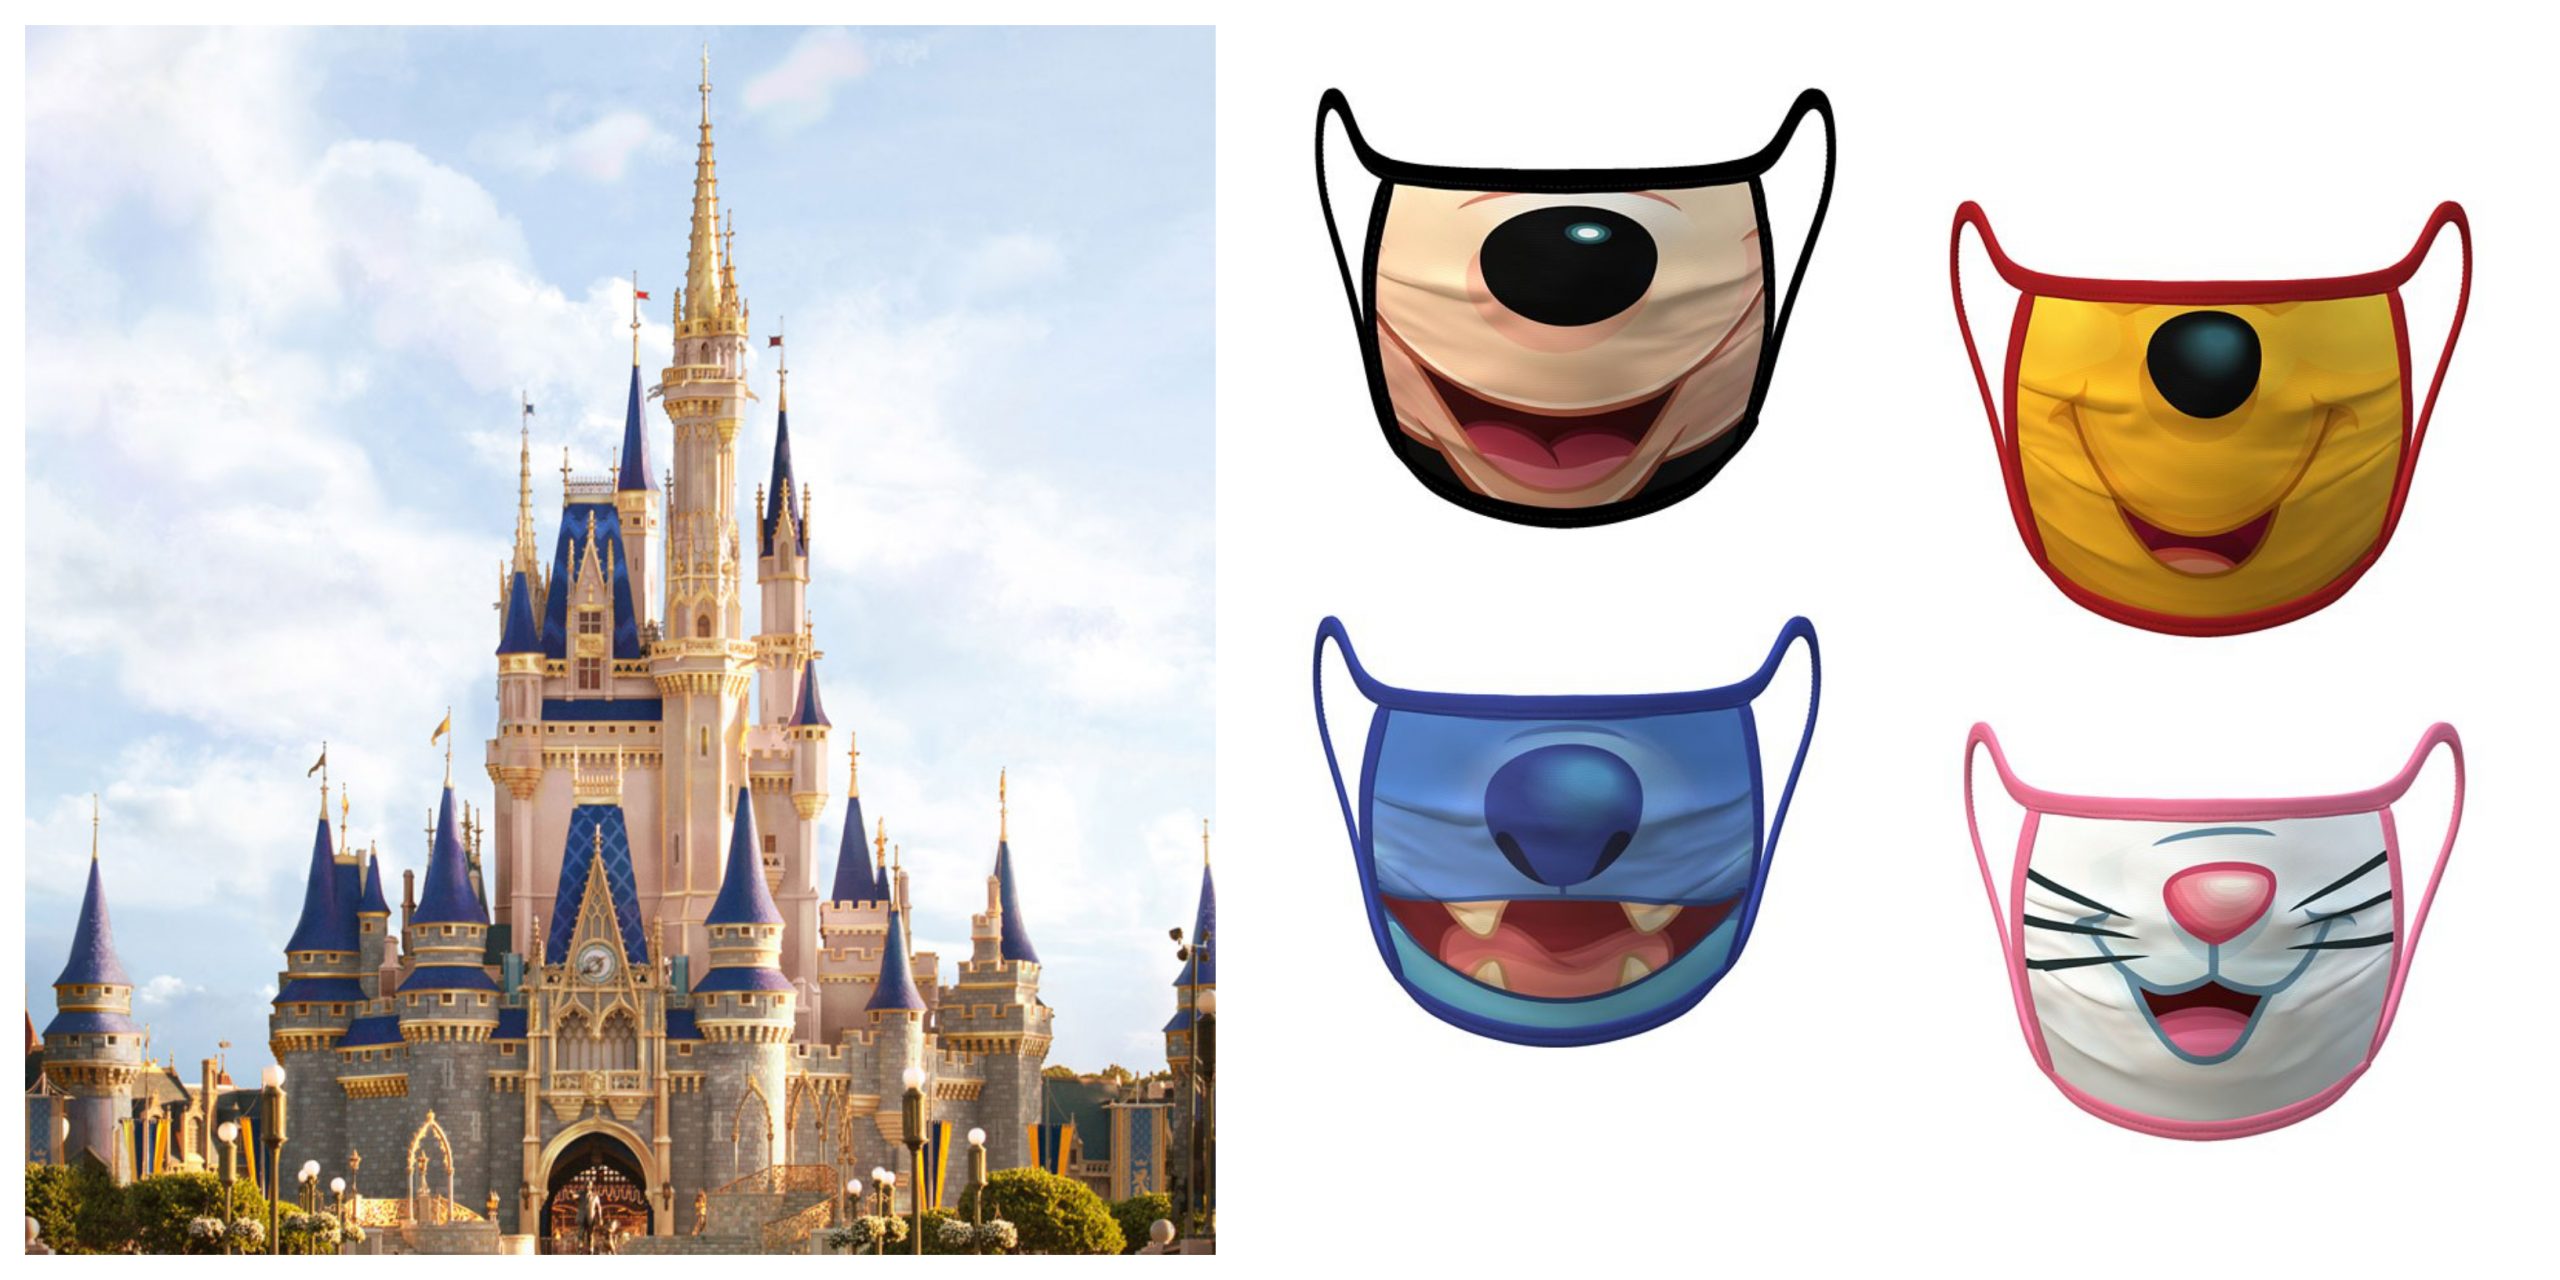 Orange County Officials say Face Mask requirement could last till 2021 at Disney World